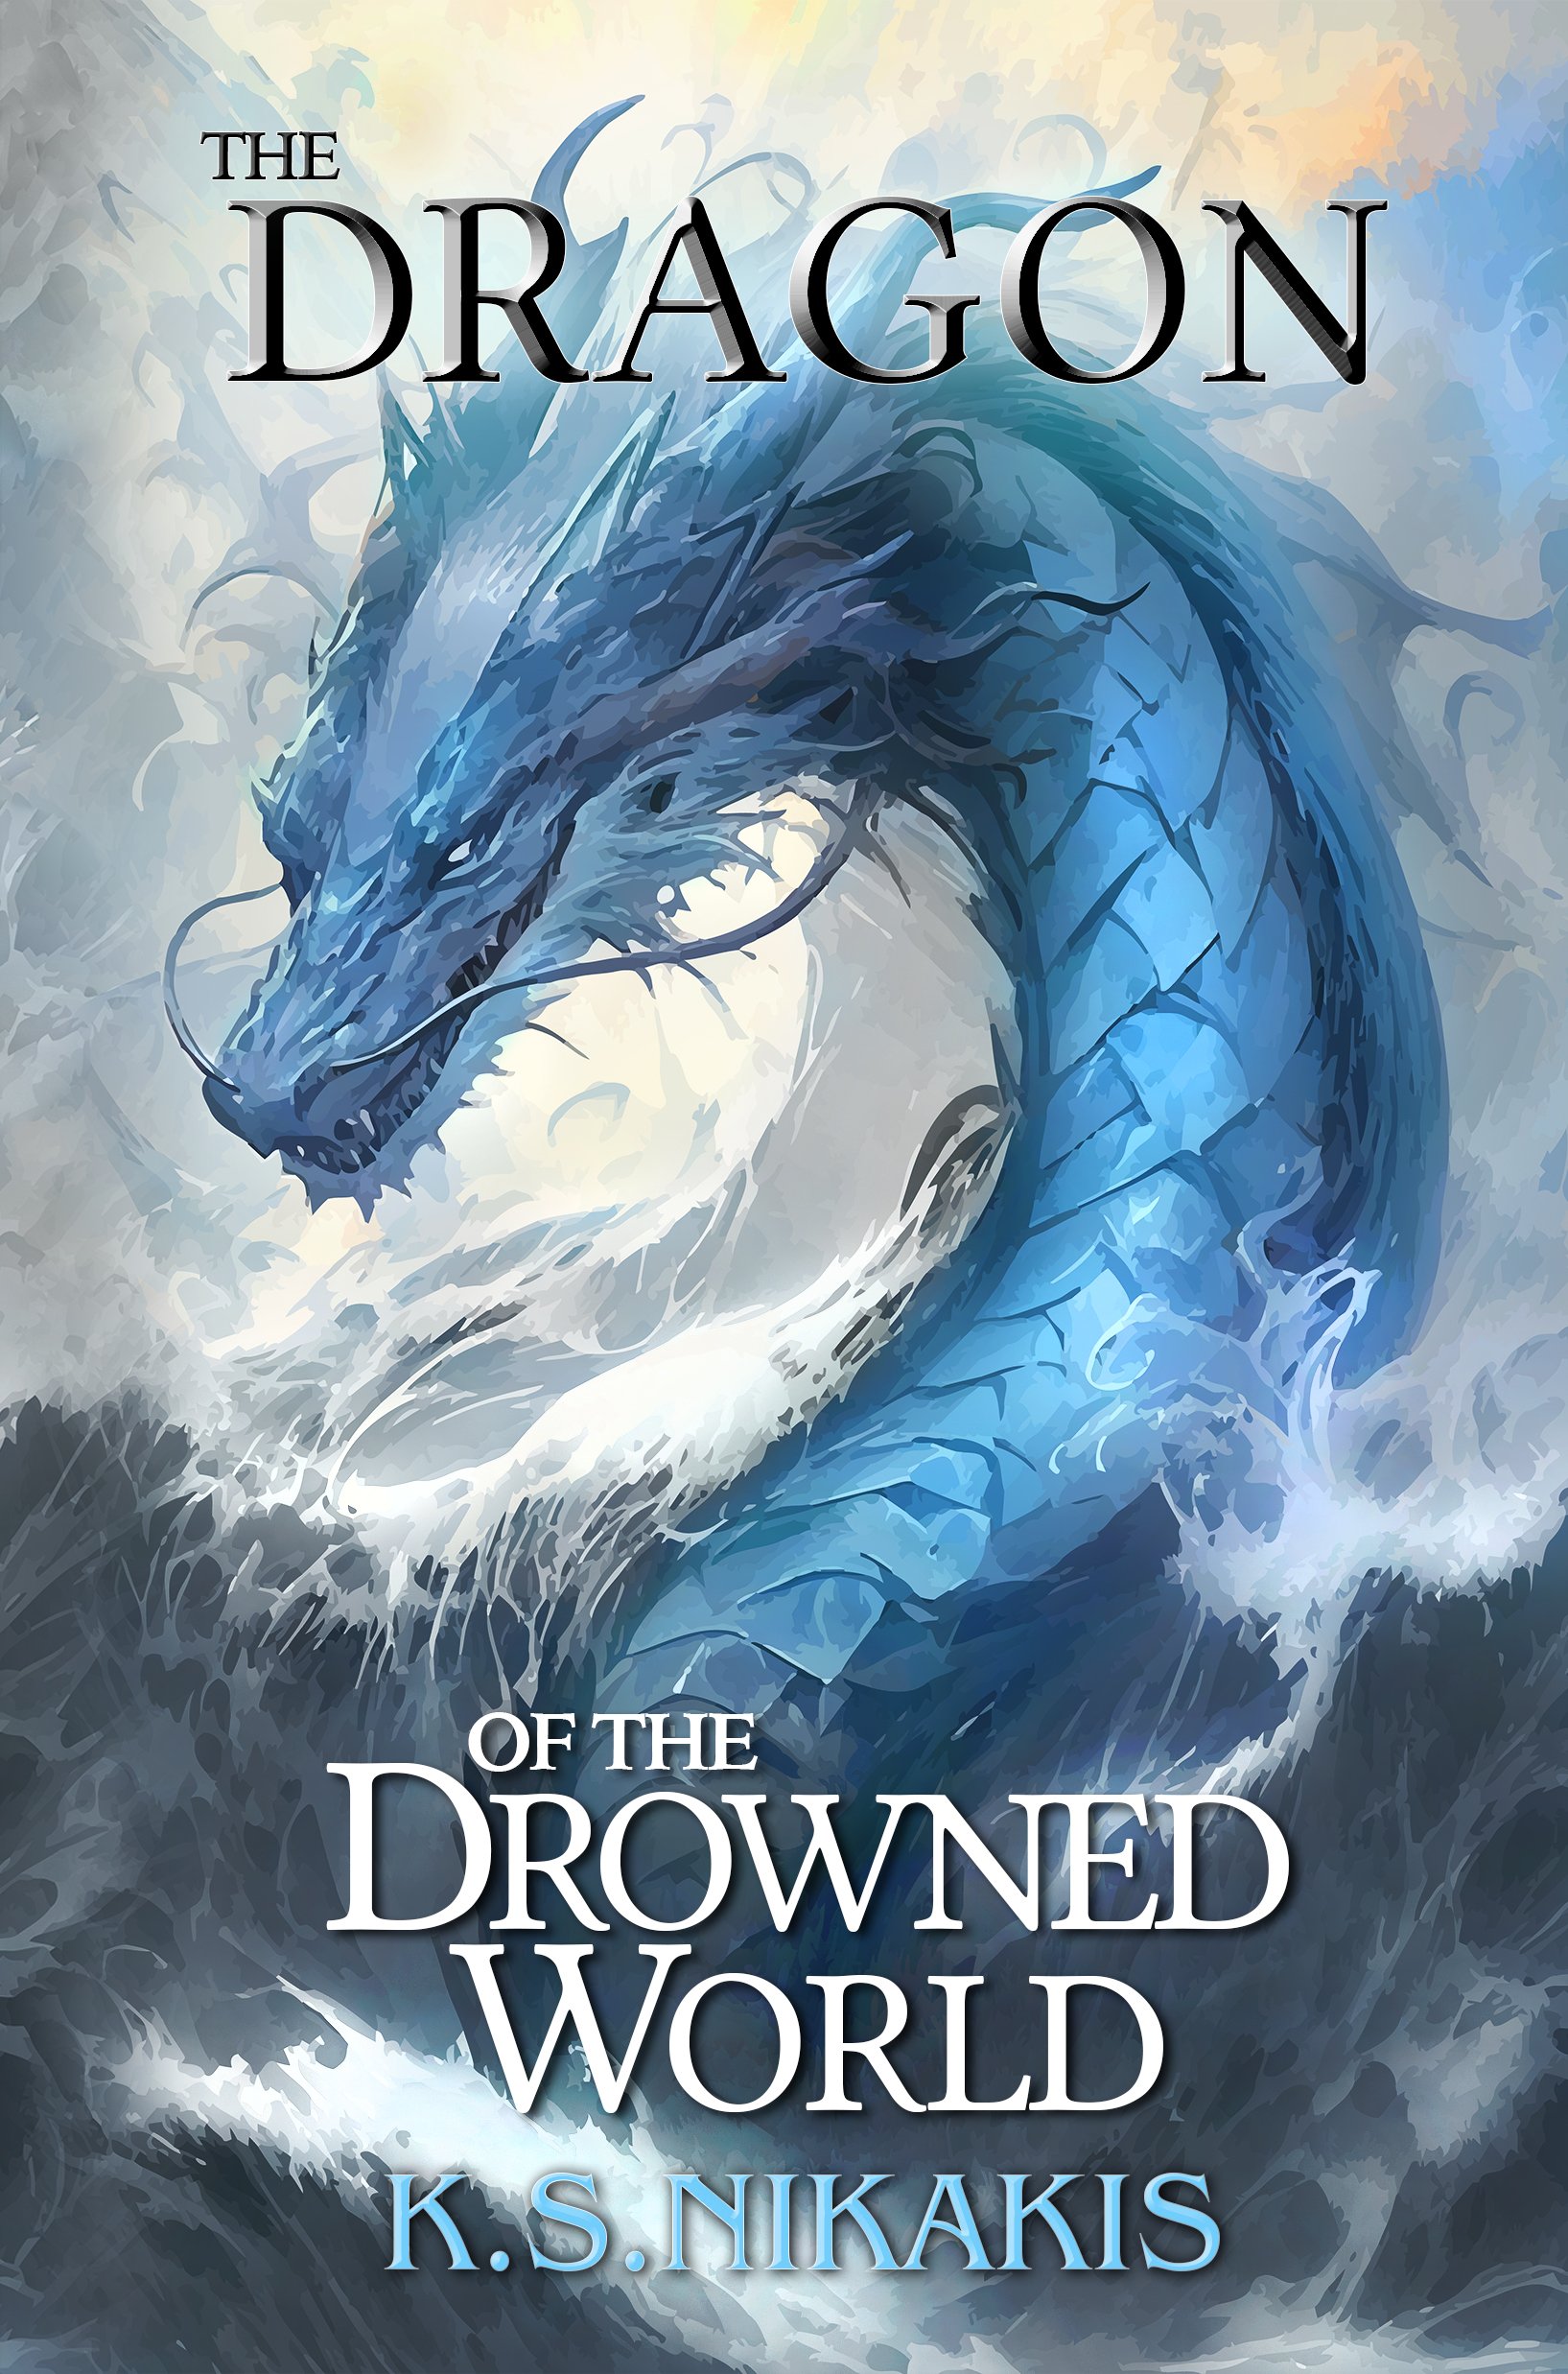 TheDragonoftheDrownedWorld-front-cover.jpg